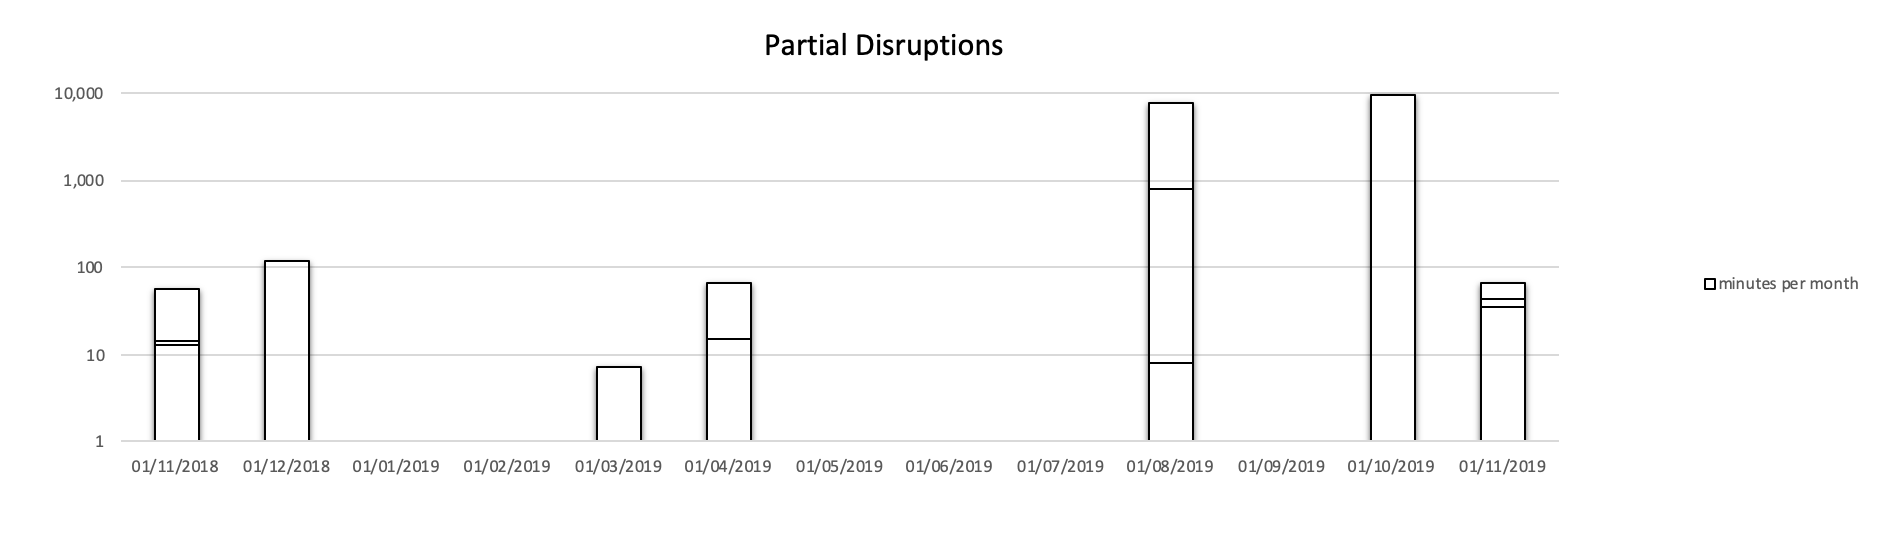 Partial Disruptions of Let's Encrypt in 2019. Multiple incidents per month are stacked.